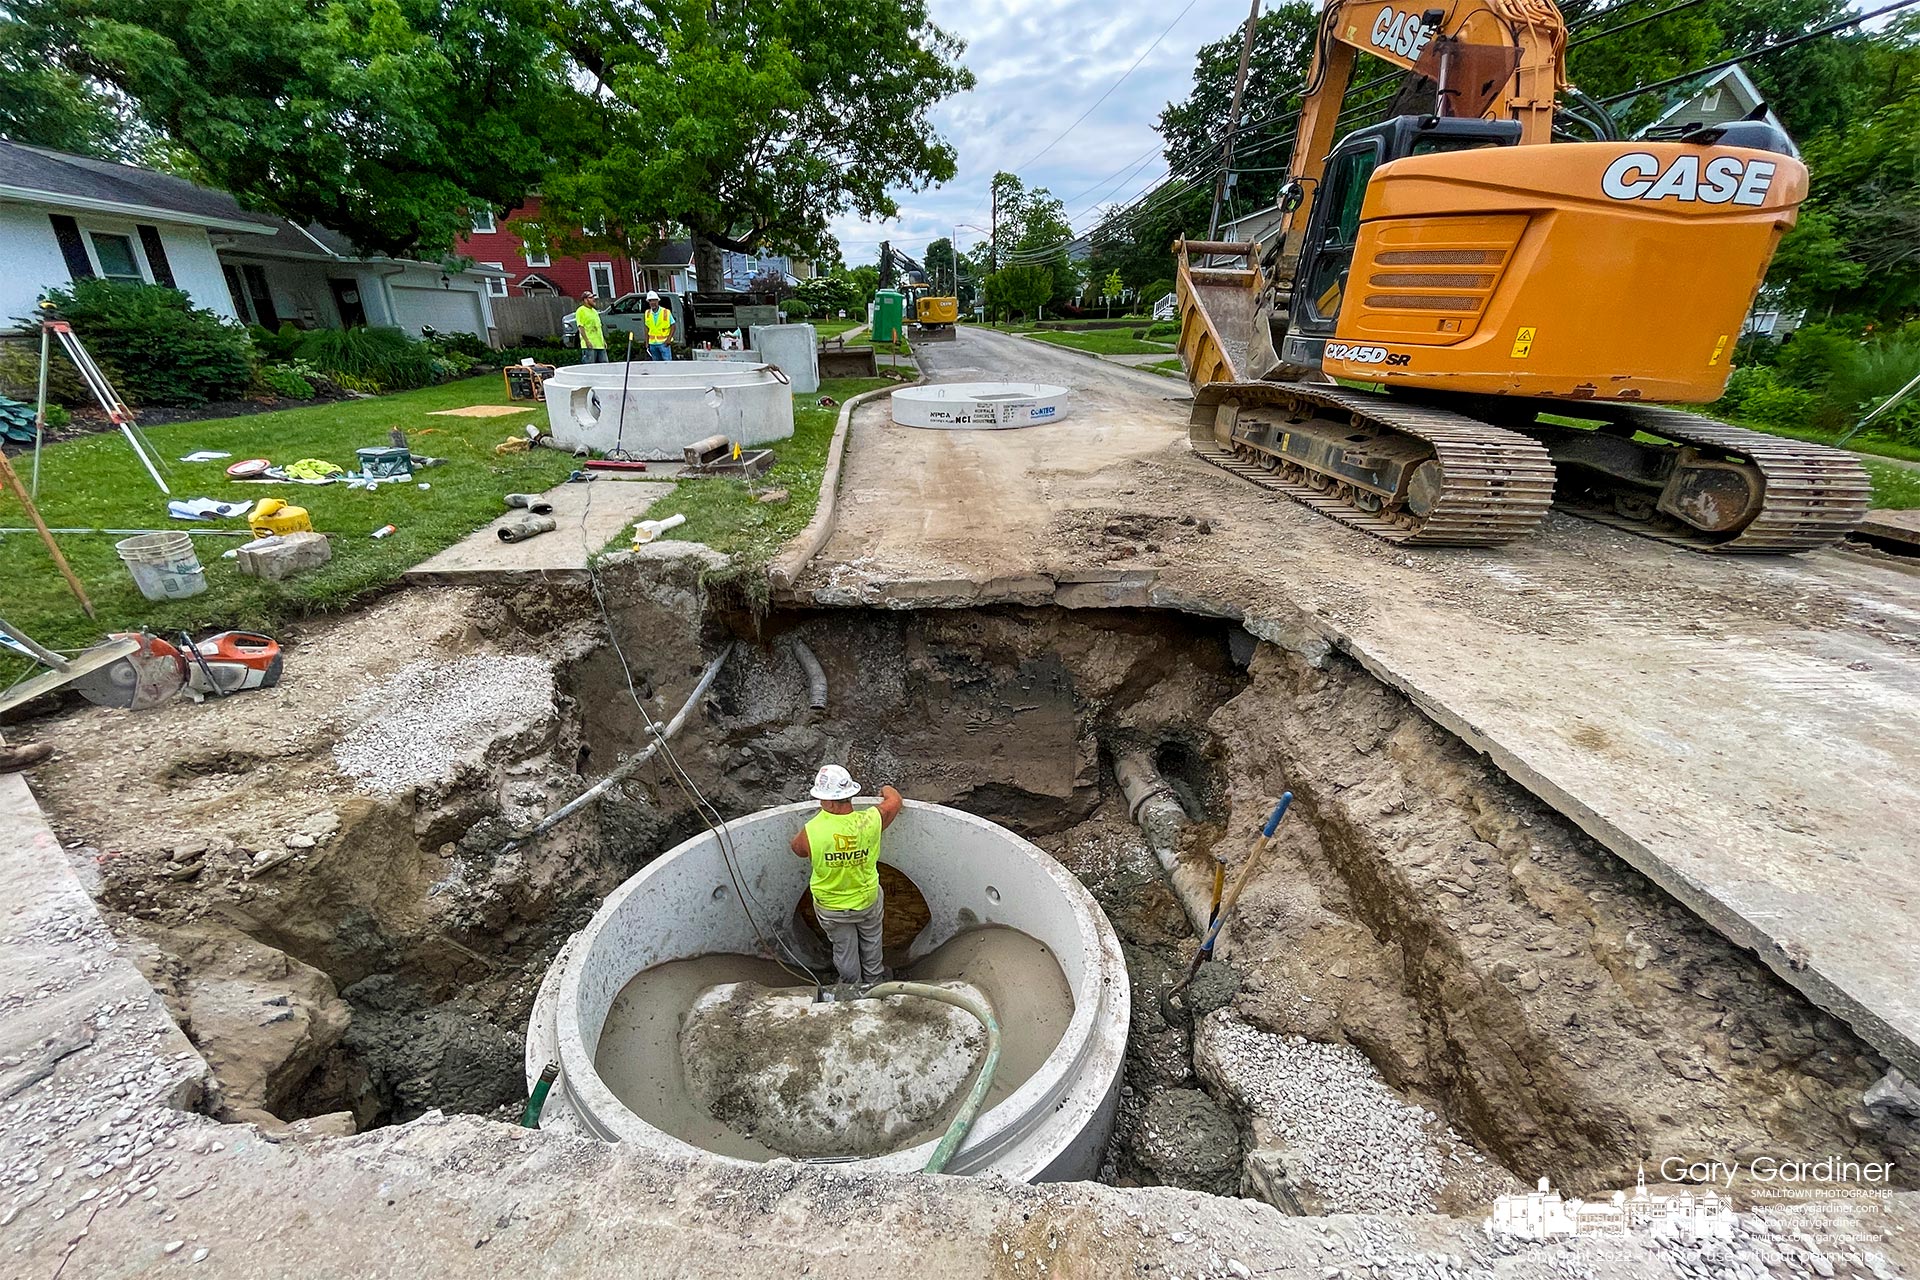 A concrete manhole base is set over an existing storm drain before the old drain is cut open to create a connection for new storm sewers being laid on East College near Otterbein Ave. My Final Photo for June 8, 2022.